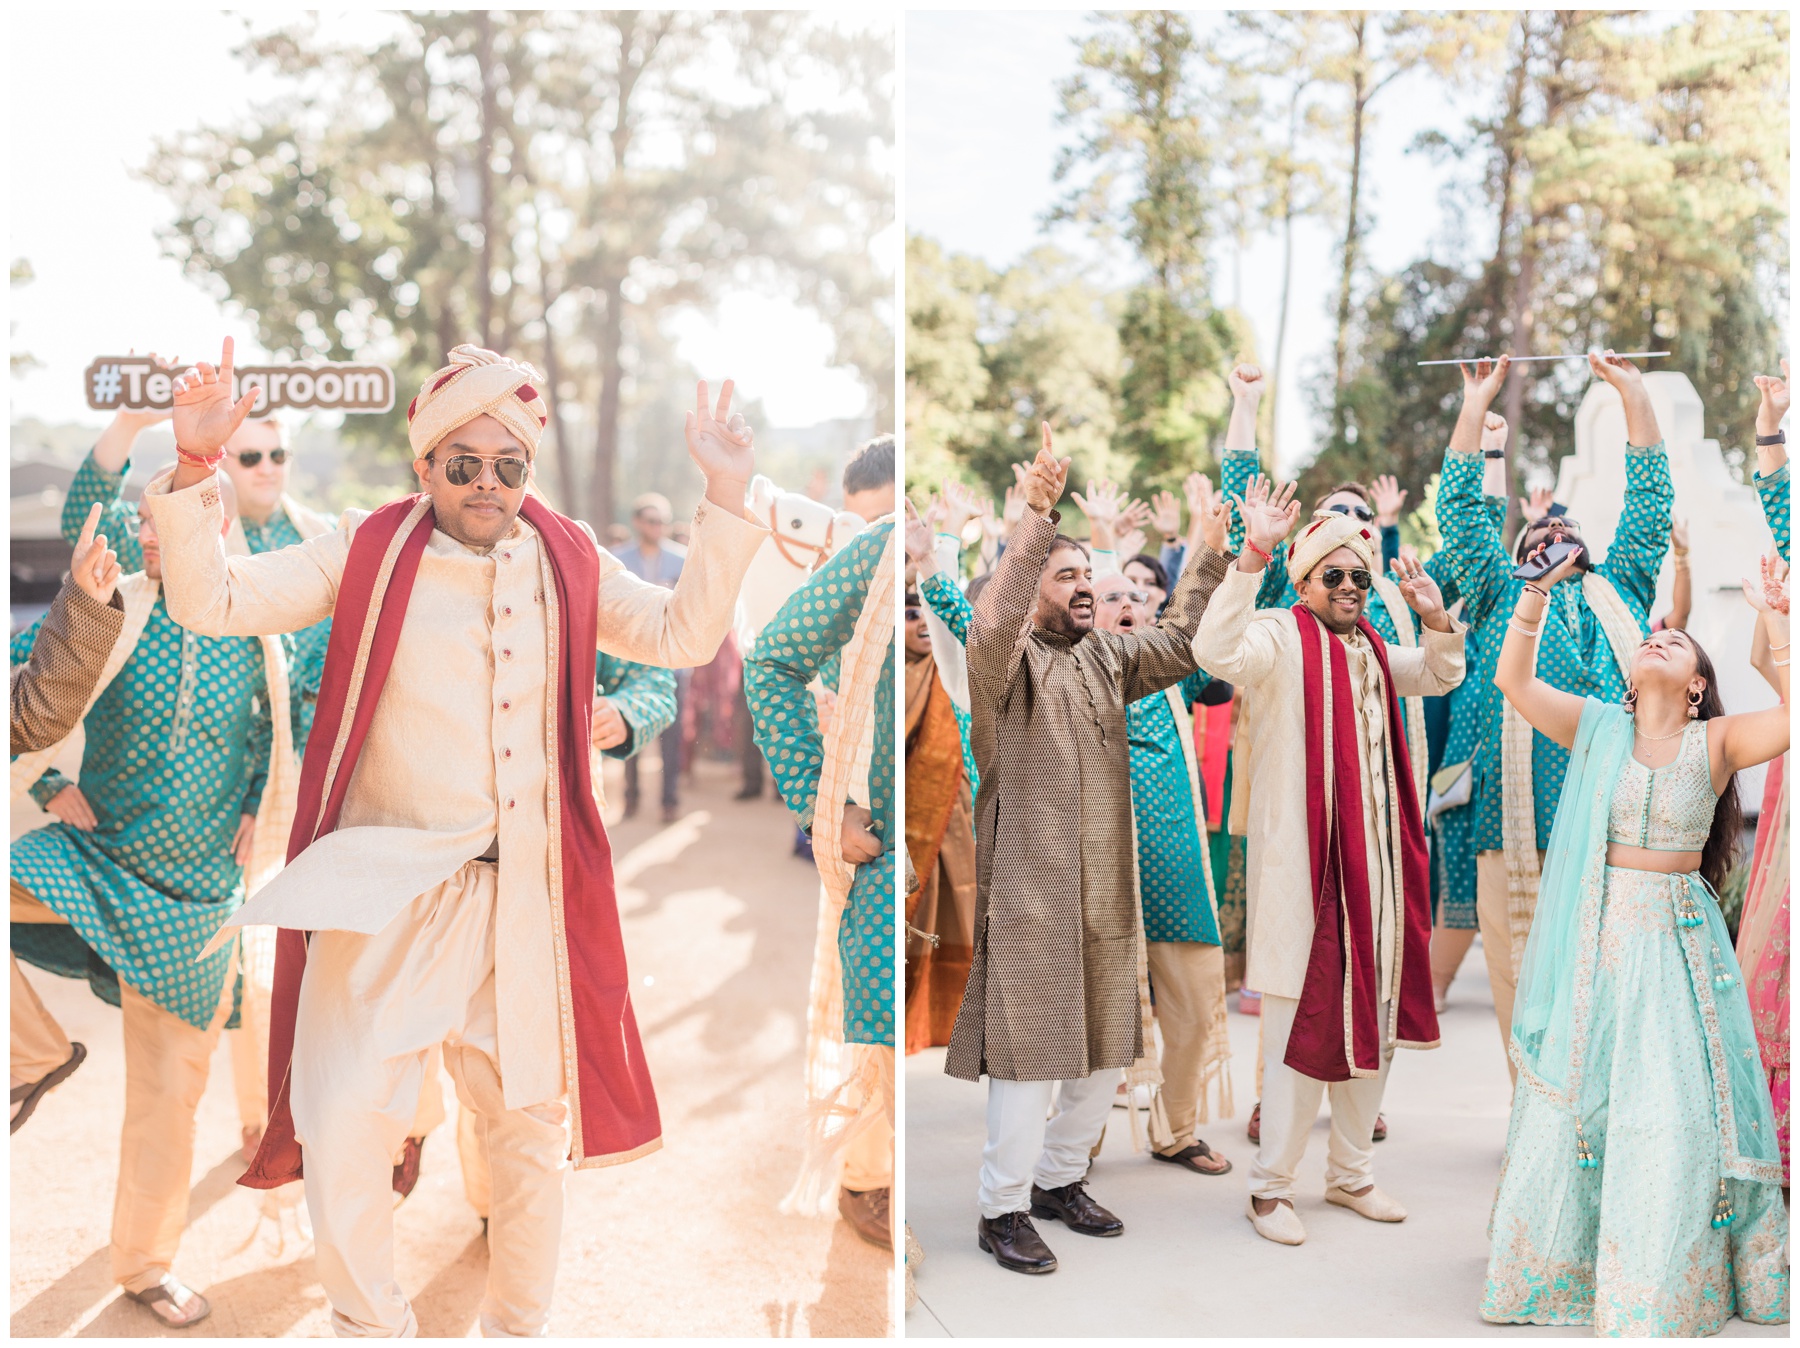 Baraat procession before a traditional Indian wedding ceremony at The Peach Orchard